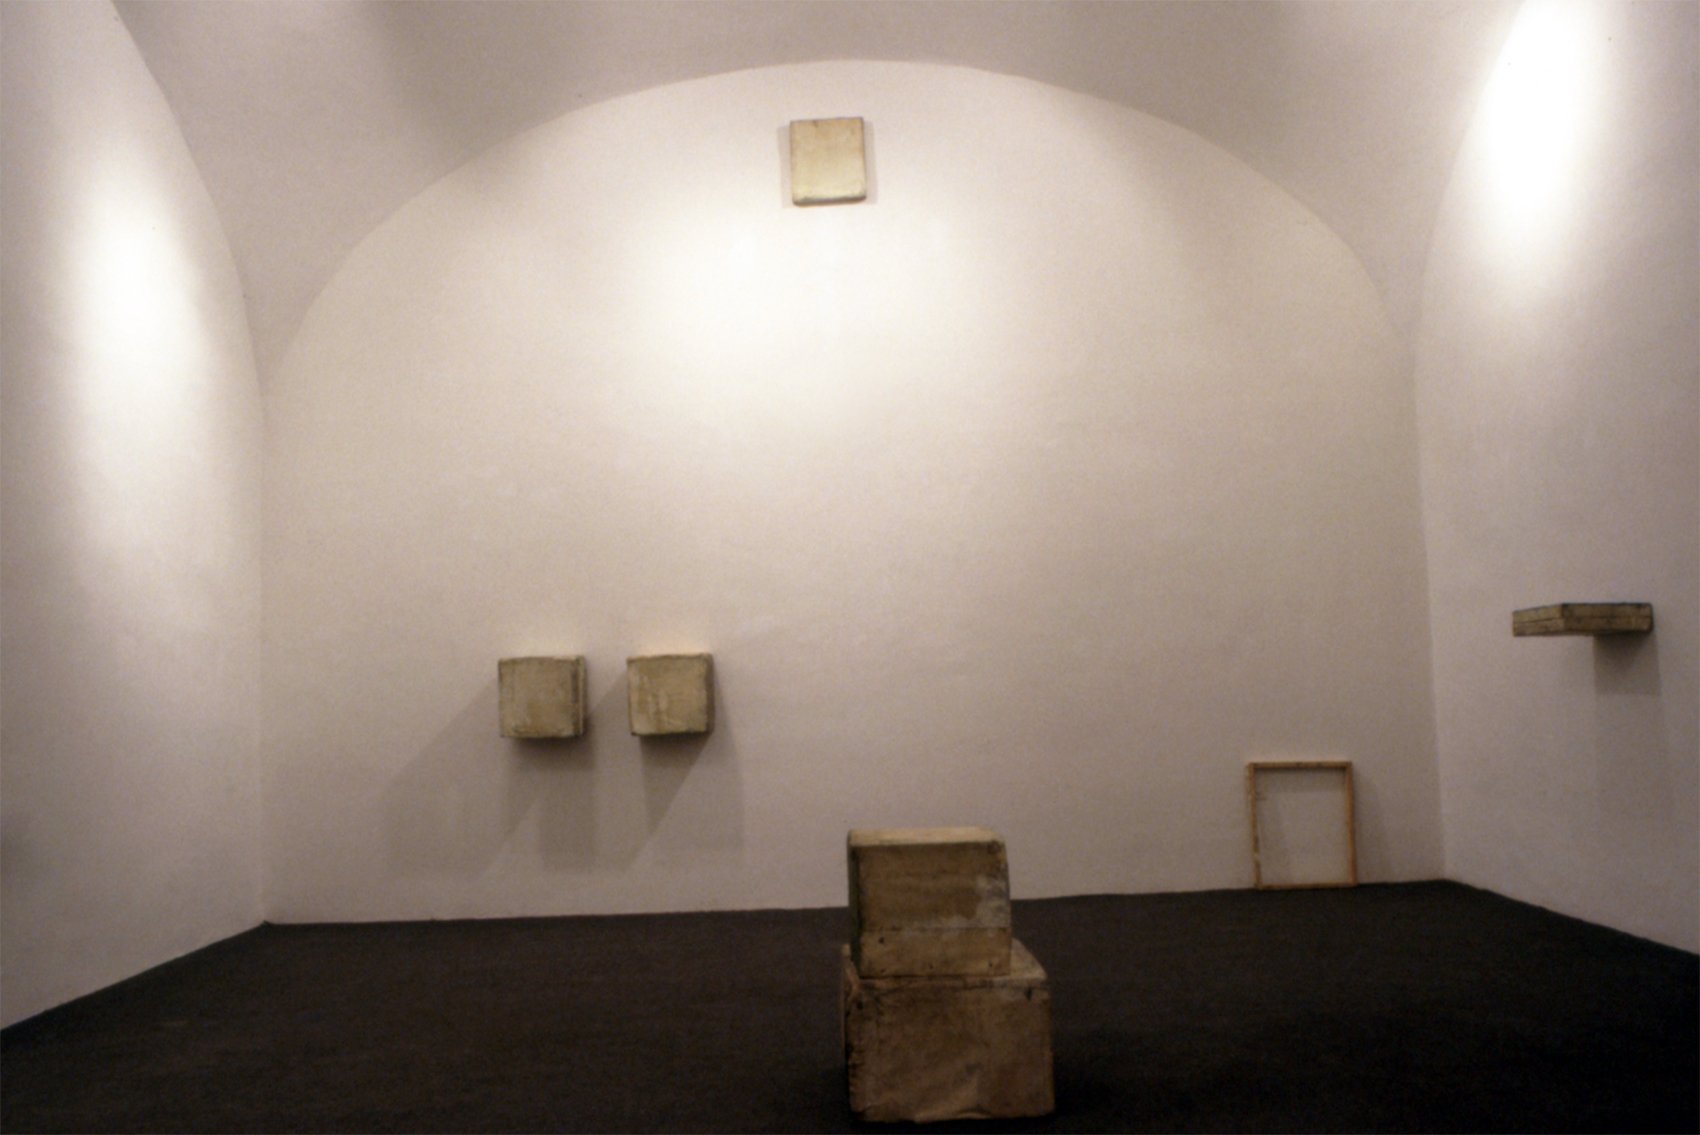 1. Lawrence Carroll - John Millei, Paintings, 11 May 1995, installation view.jpg